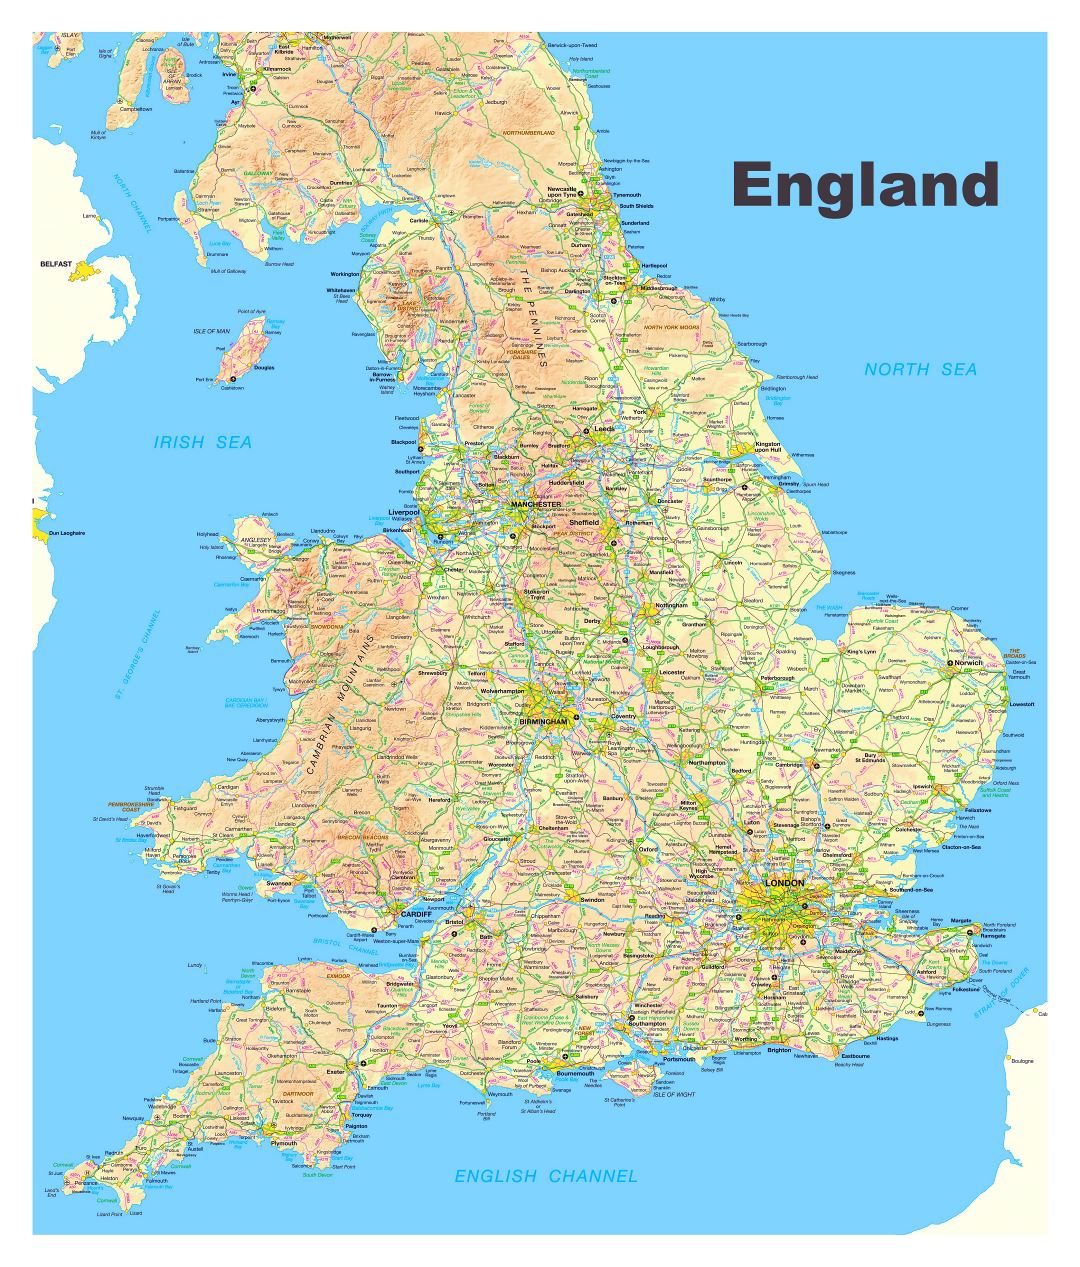 Large map of England with roads, cities and other marks